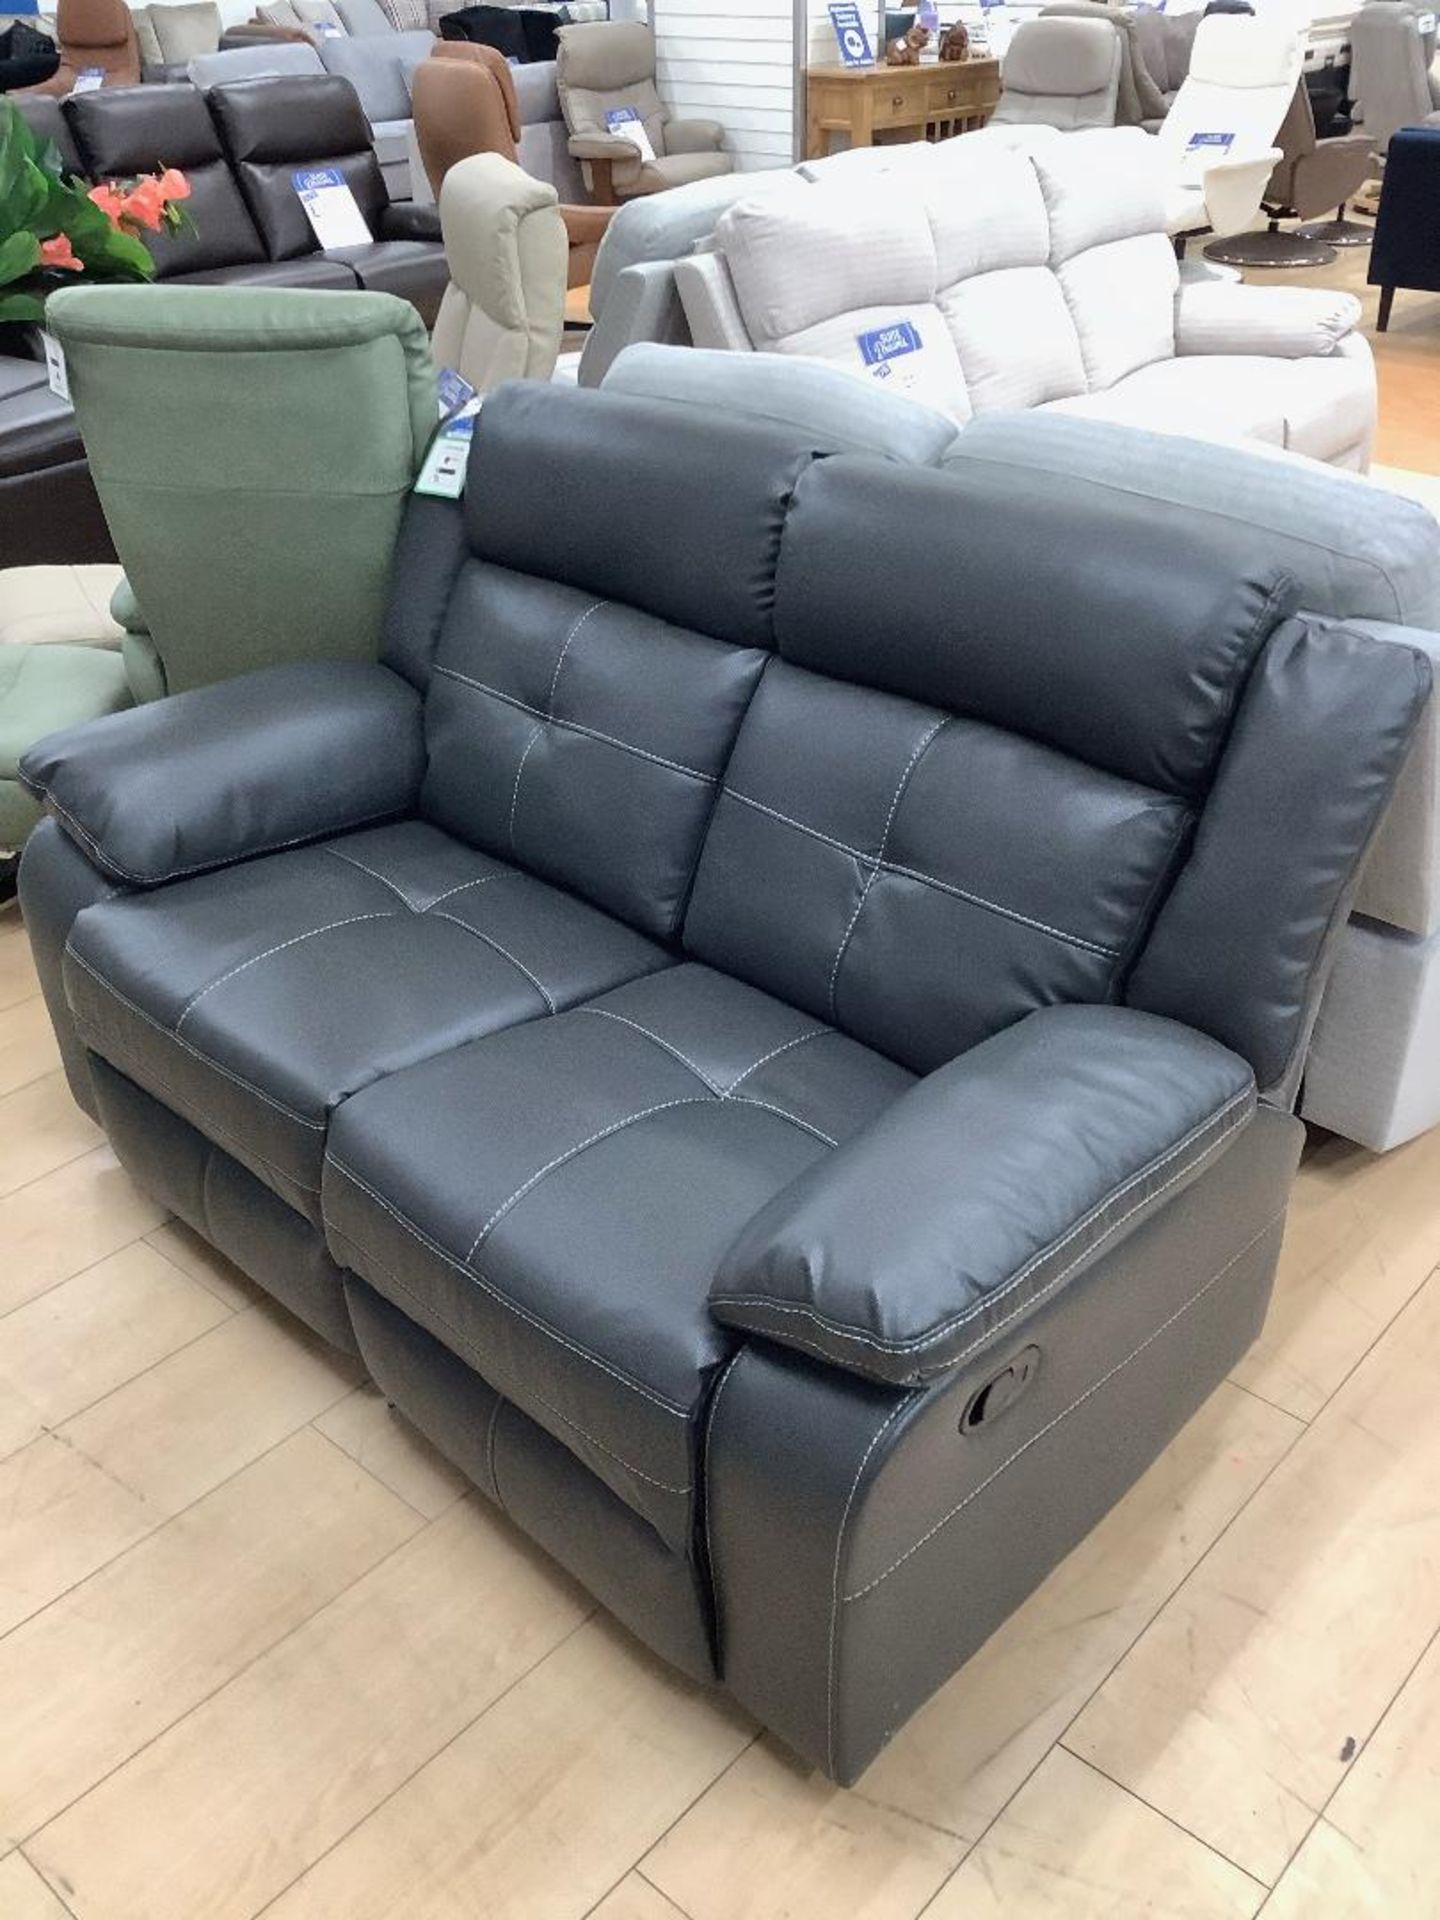 Brand new boxed langdale 3 seater plus 2 seater reclining sofa in grey leather - Image 2 of 2